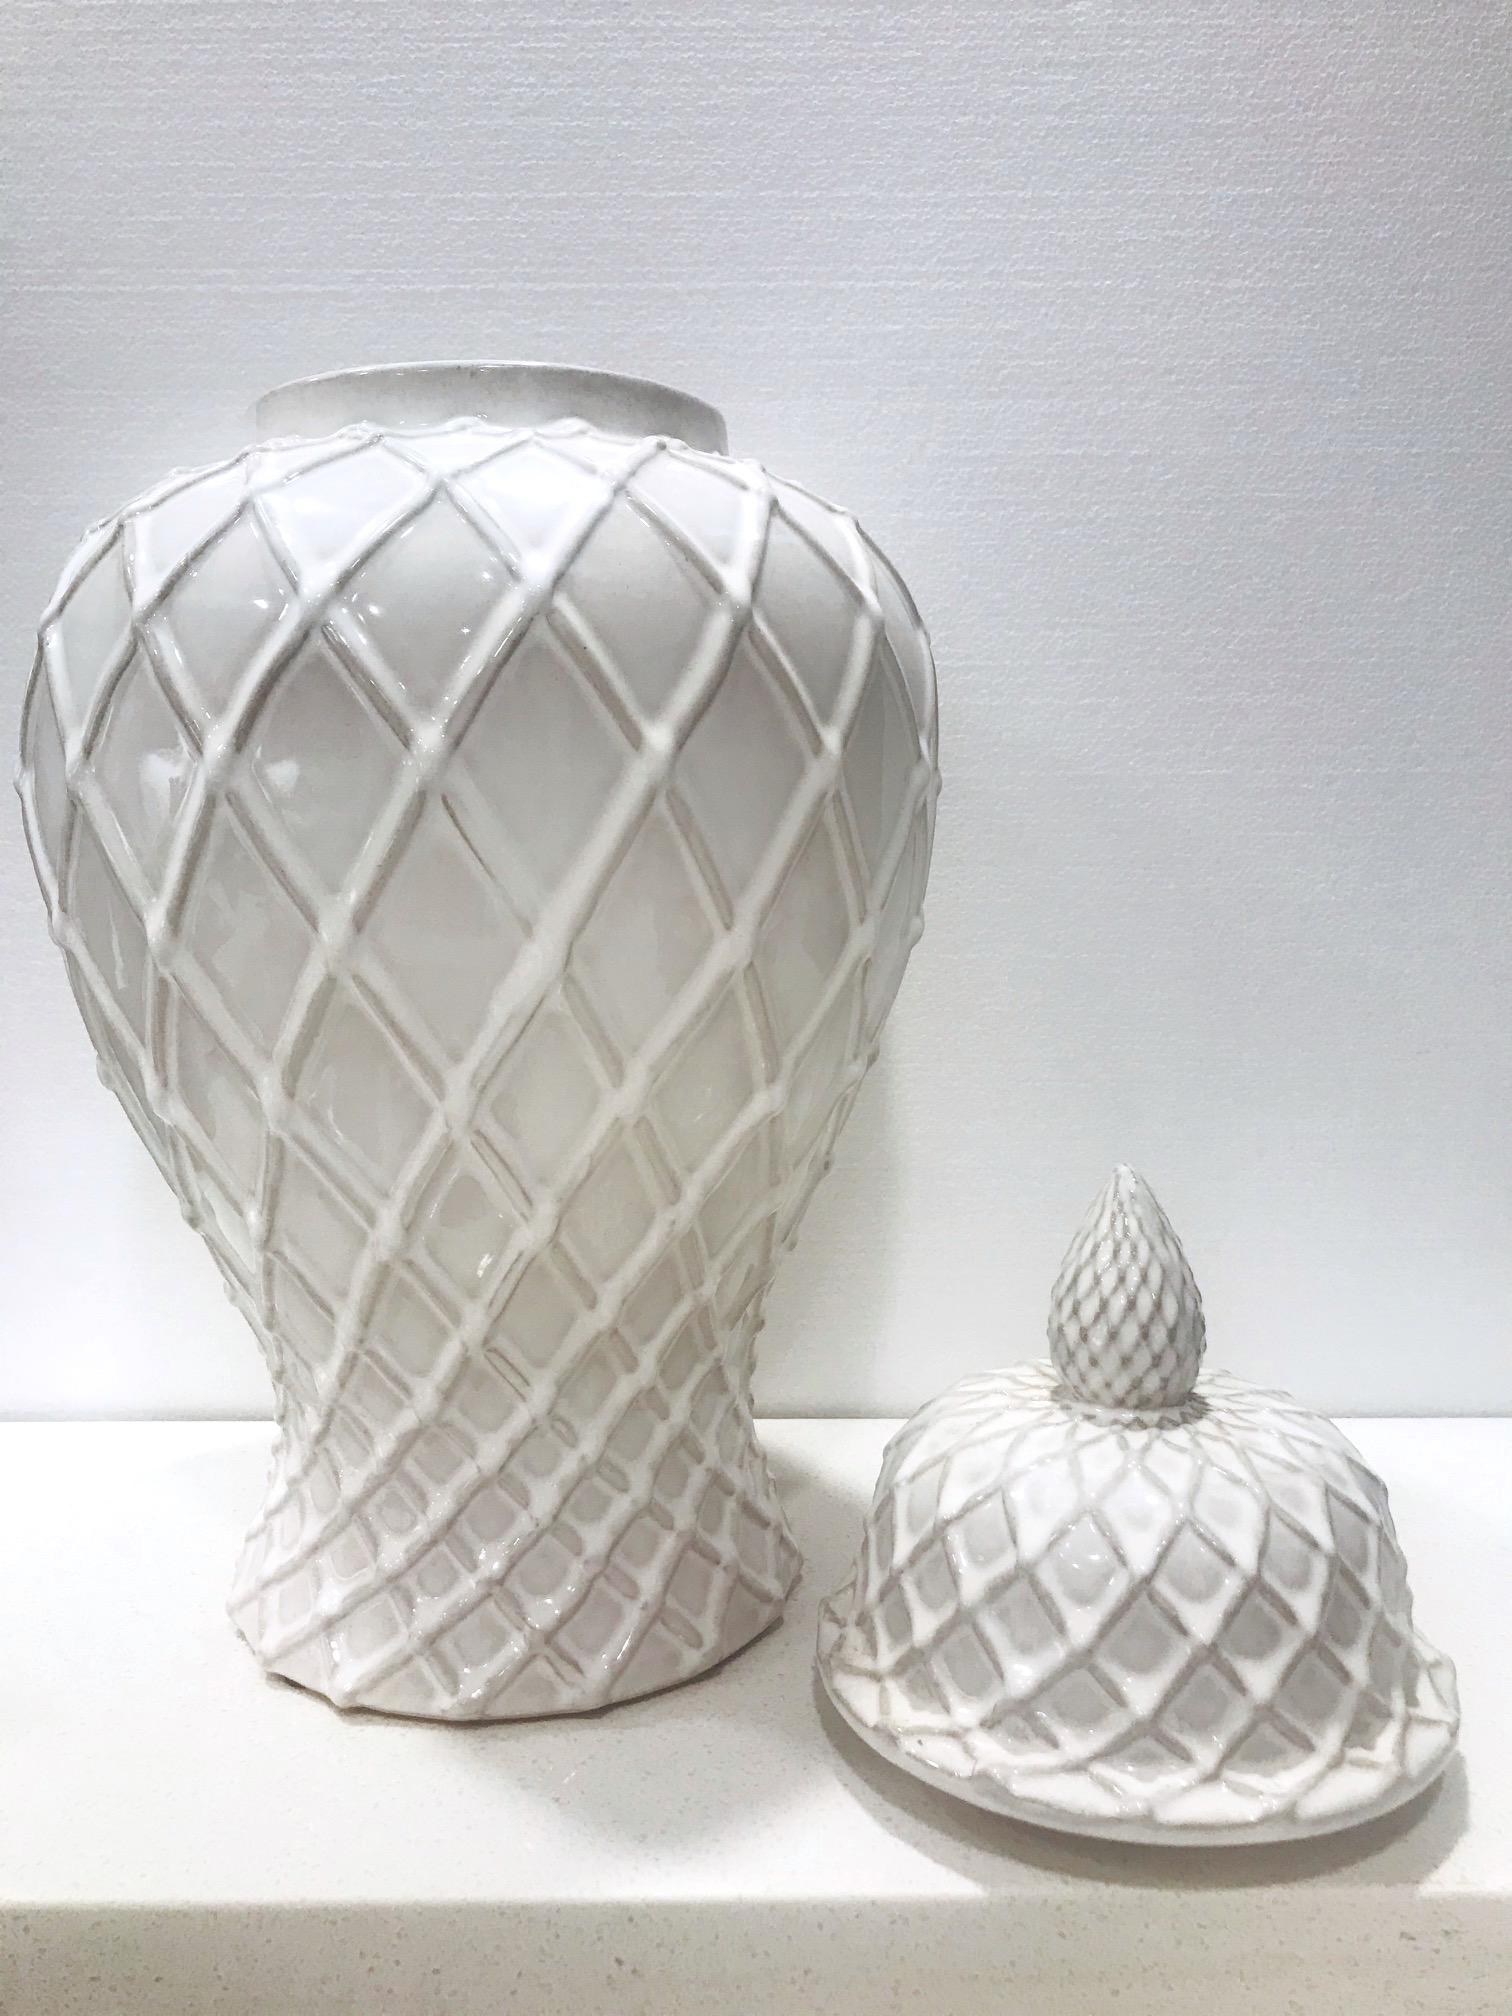 Hollywood Regency Blanc de Chine White Ginger Jar with Chippendale Lattice Design, Italy, 1990s